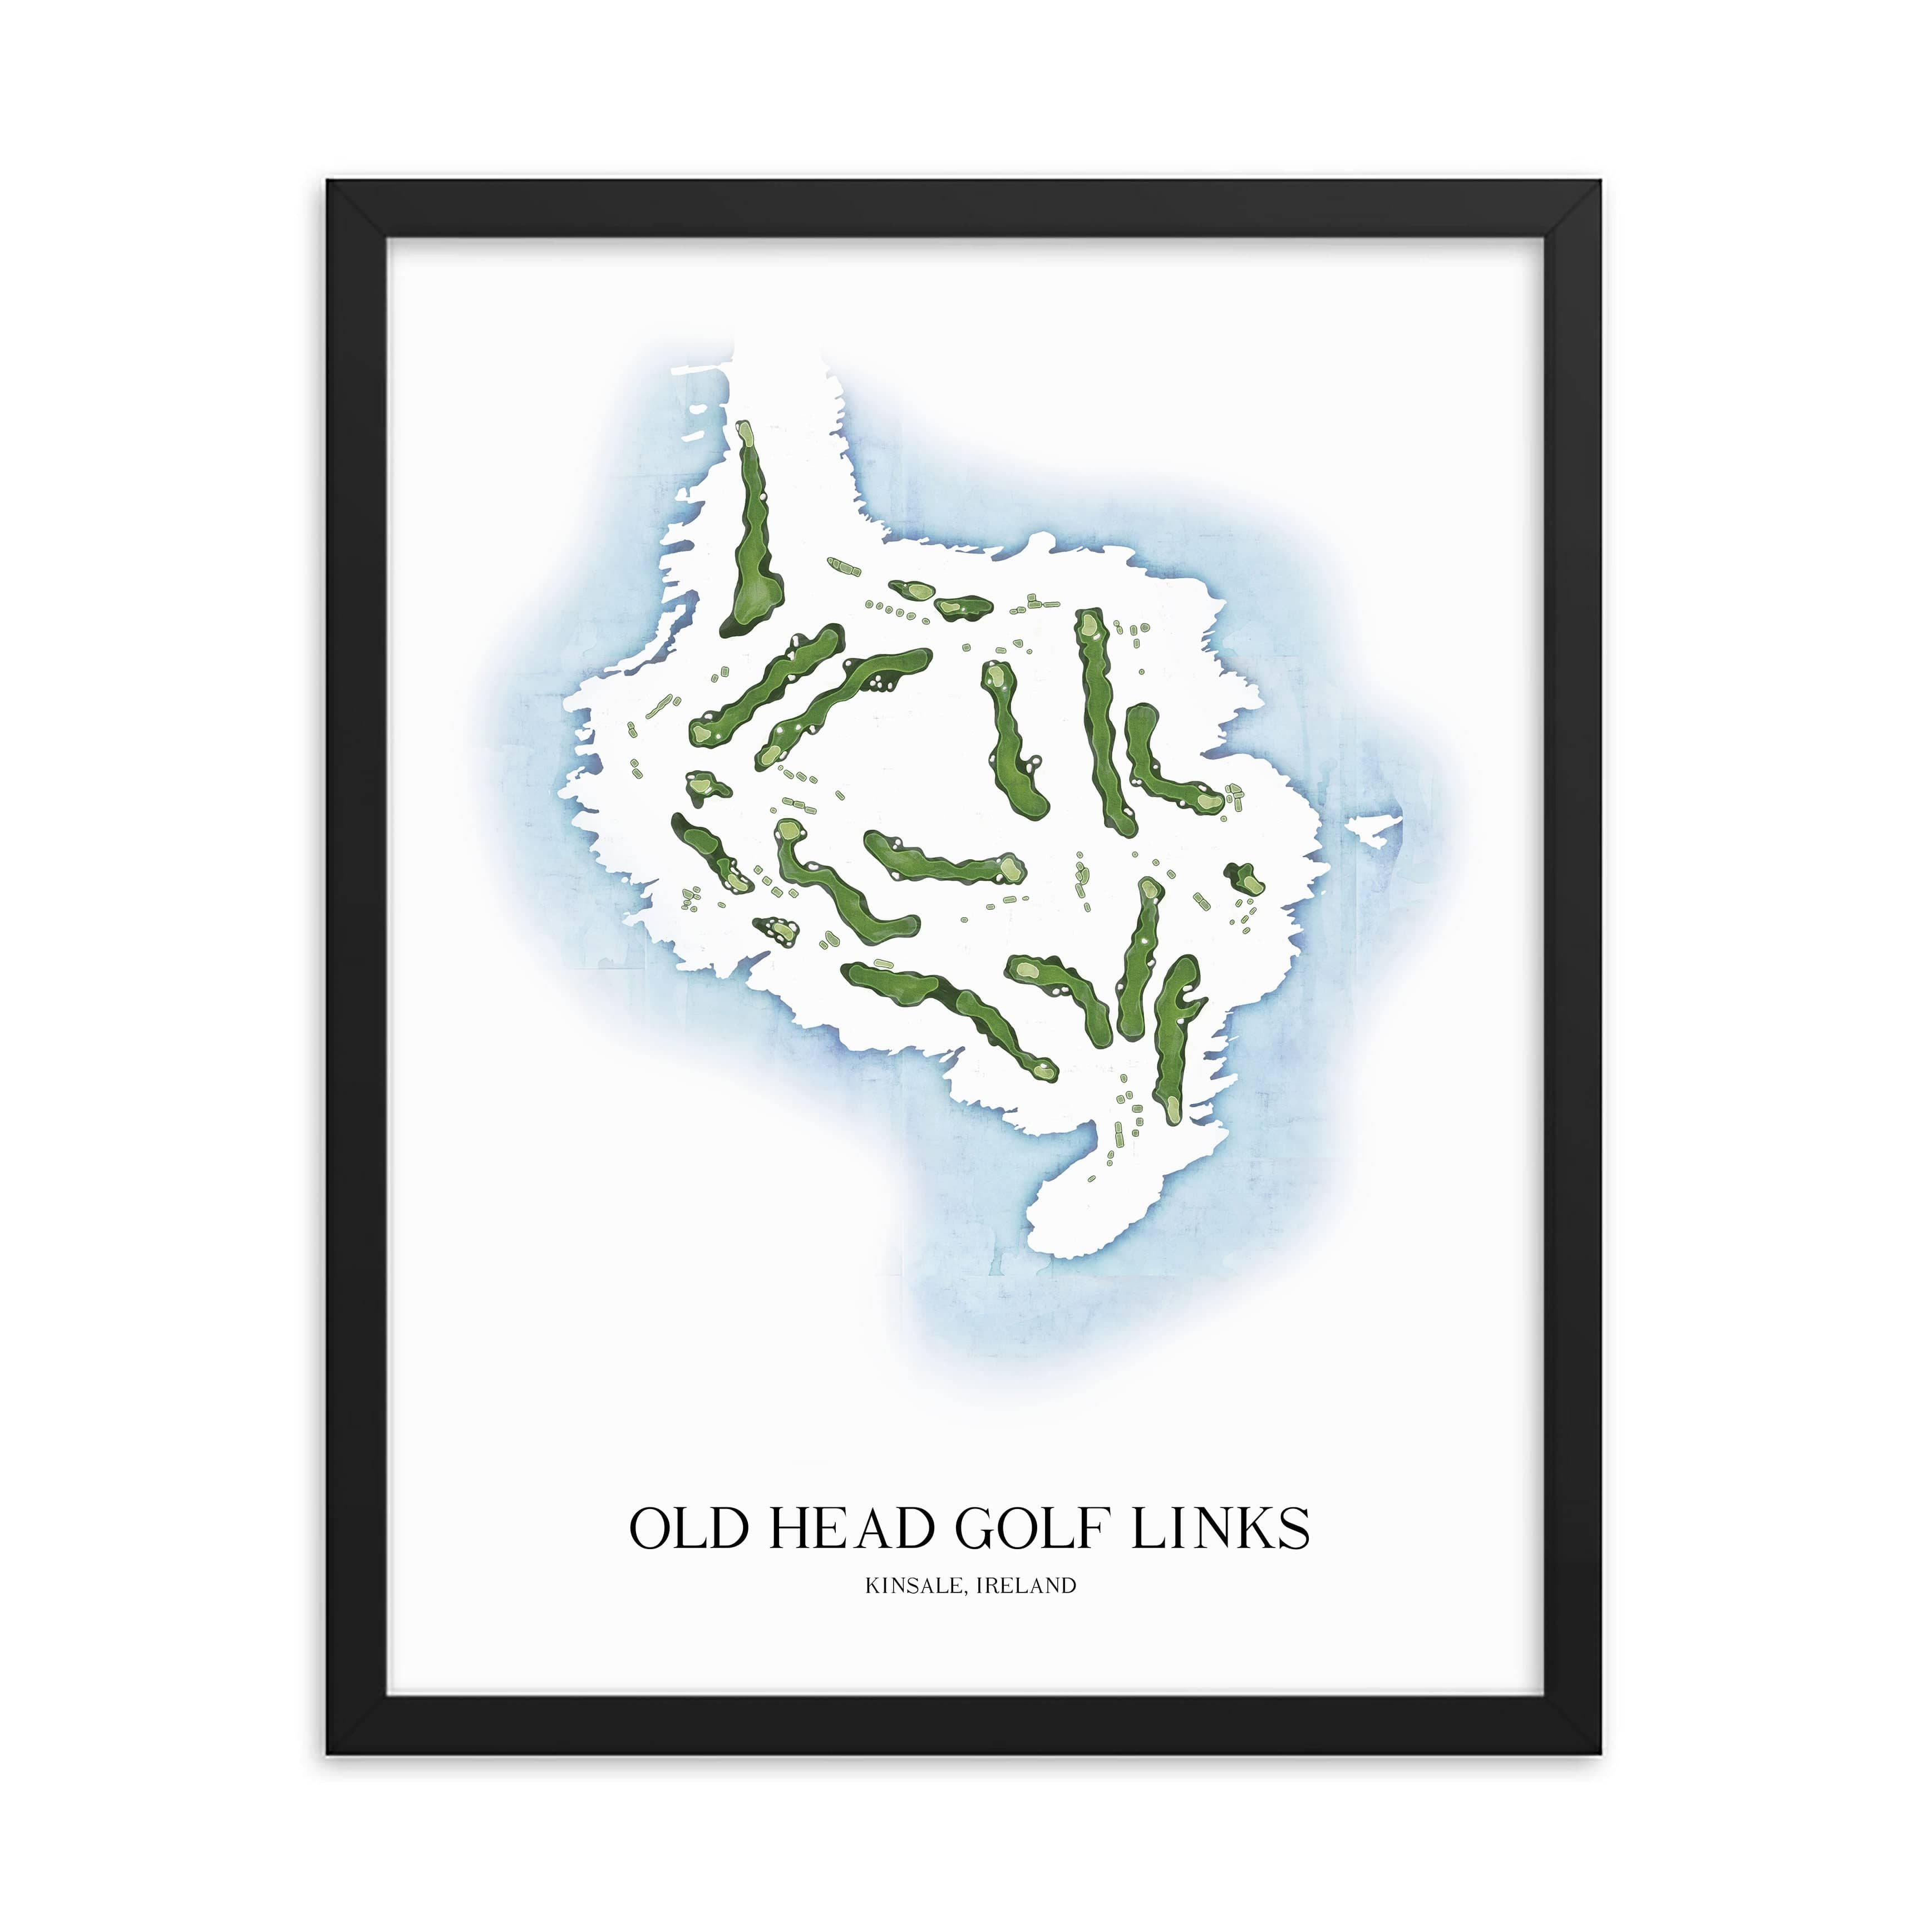 The 19th Hole Golf Shop - Golf Course Prints -  Old Head Golf Links Golf Course Map